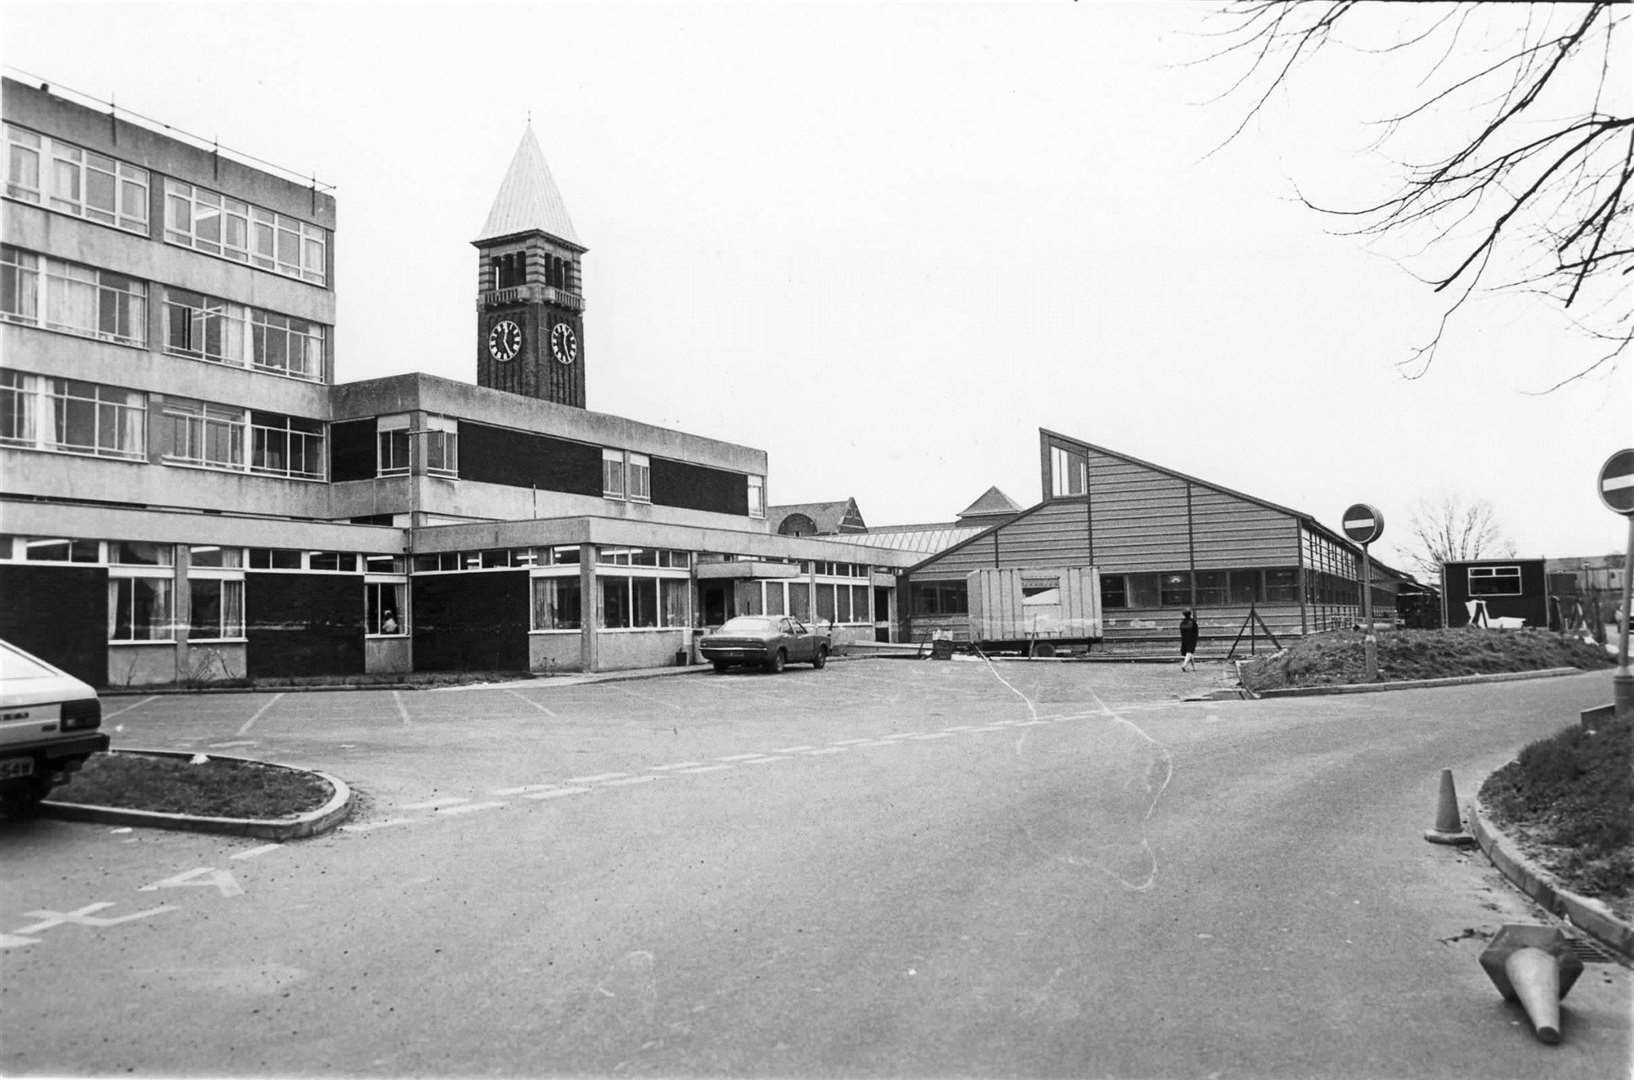 Medway Hospital, Gillingham in 1988 following one of its many revamps since opening in 1905